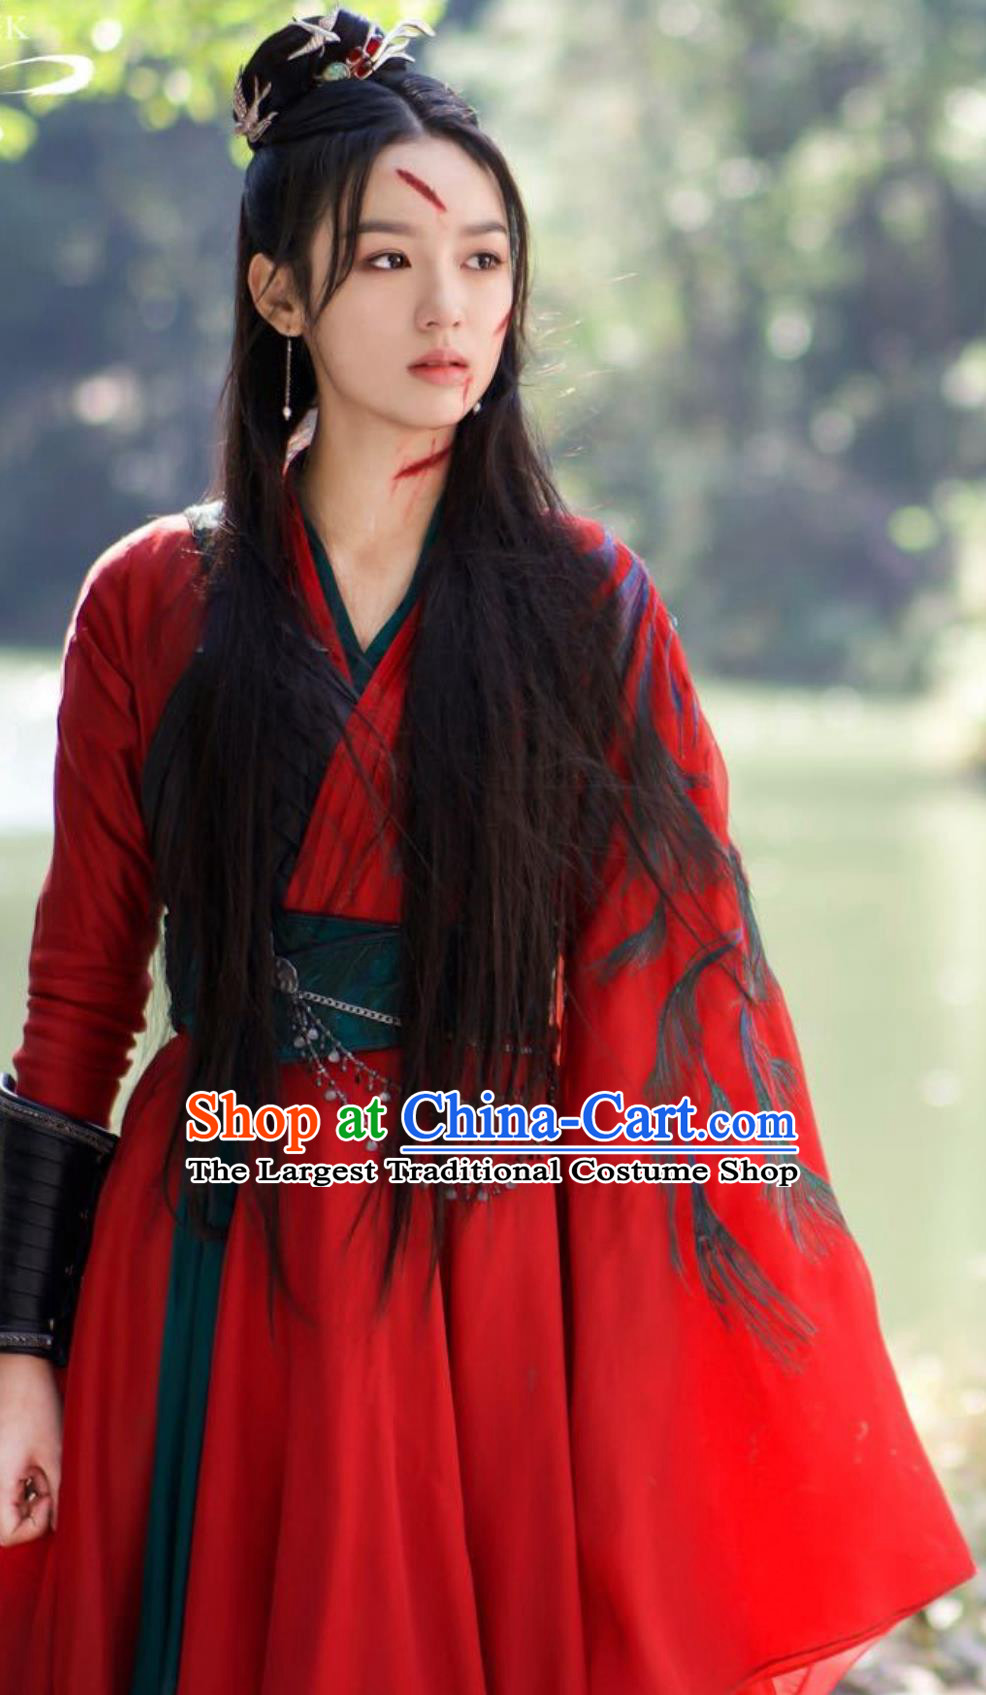 Ancient China Super Heroine Red Costumes 2023 TV Series Back From The Brink Swordswoman Yan Hui Dress Clothing